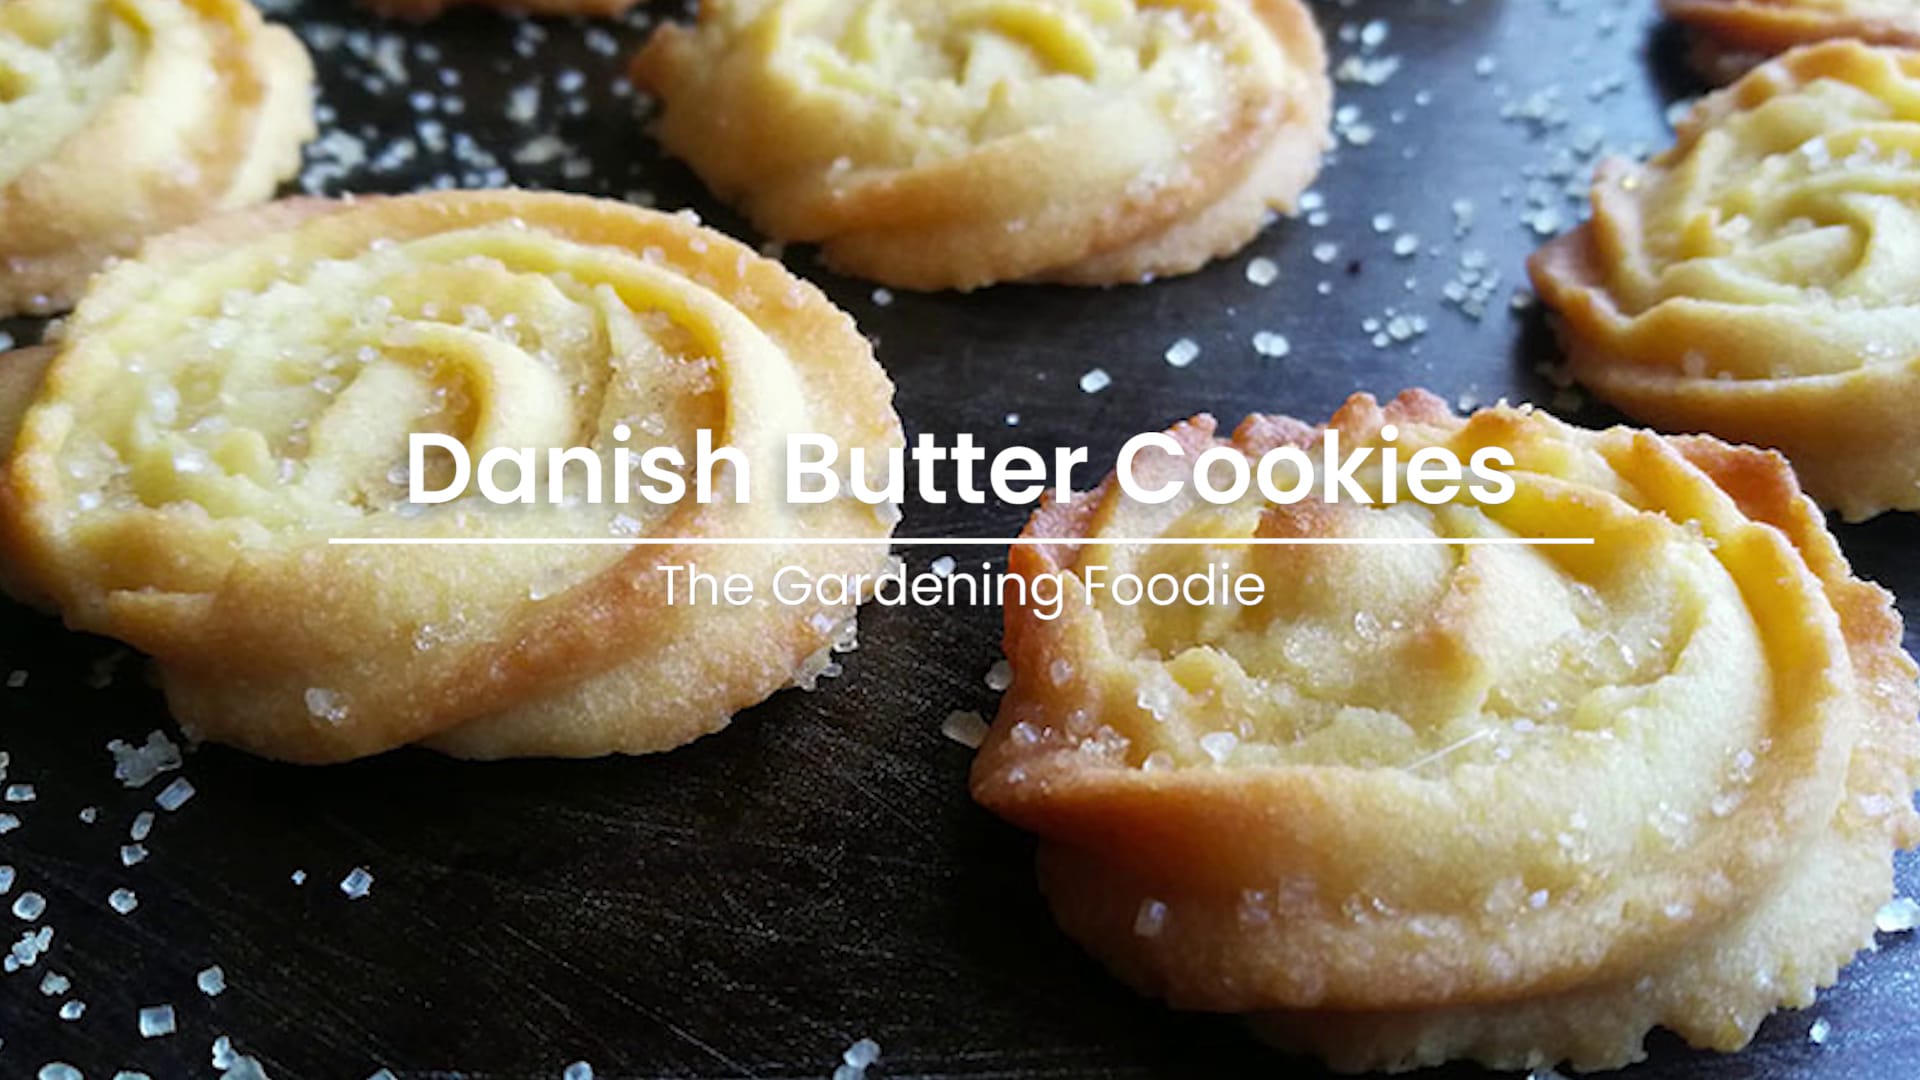 Danish Butter Cookies (Melt in Your Mouth) – Takes Two Eggs